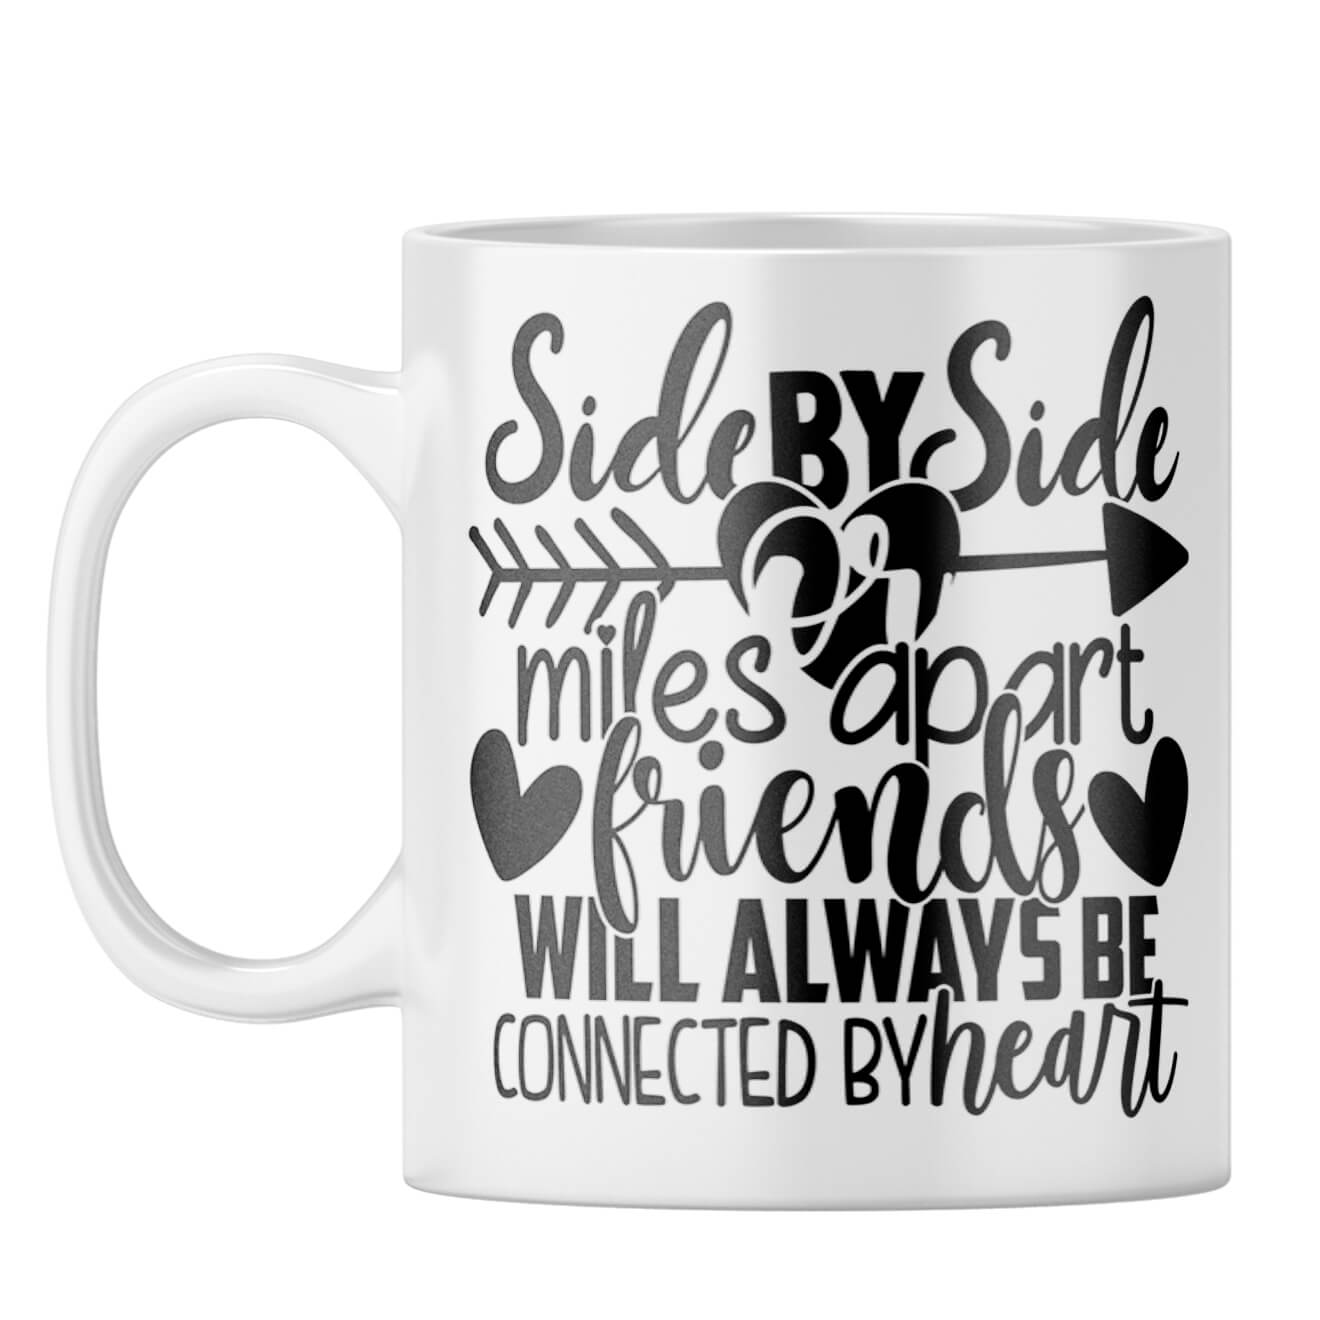 Friends Connected By Heart Coffee Mug White